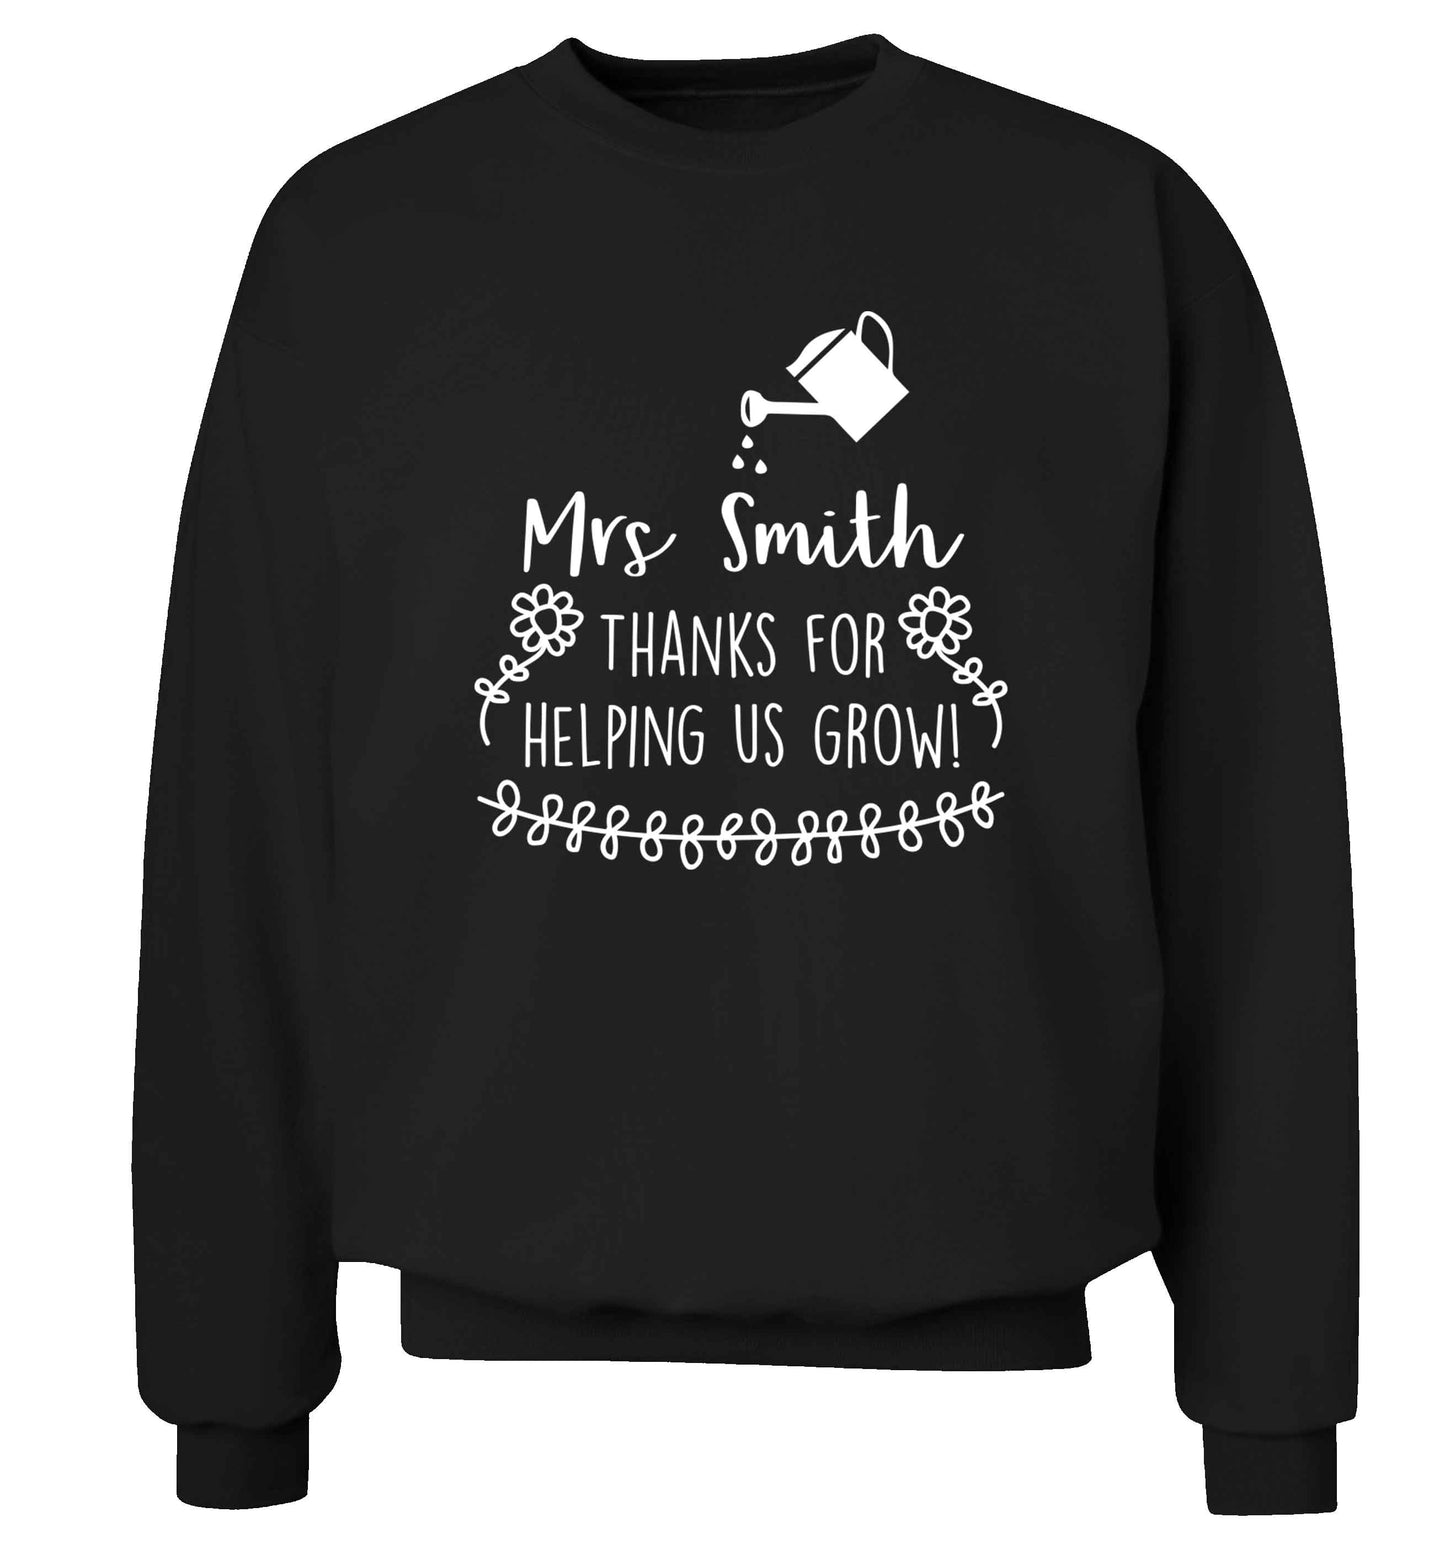 Personalised Mrs Smith thanks for helping us grow Adult's unisex black Sweater 2XL